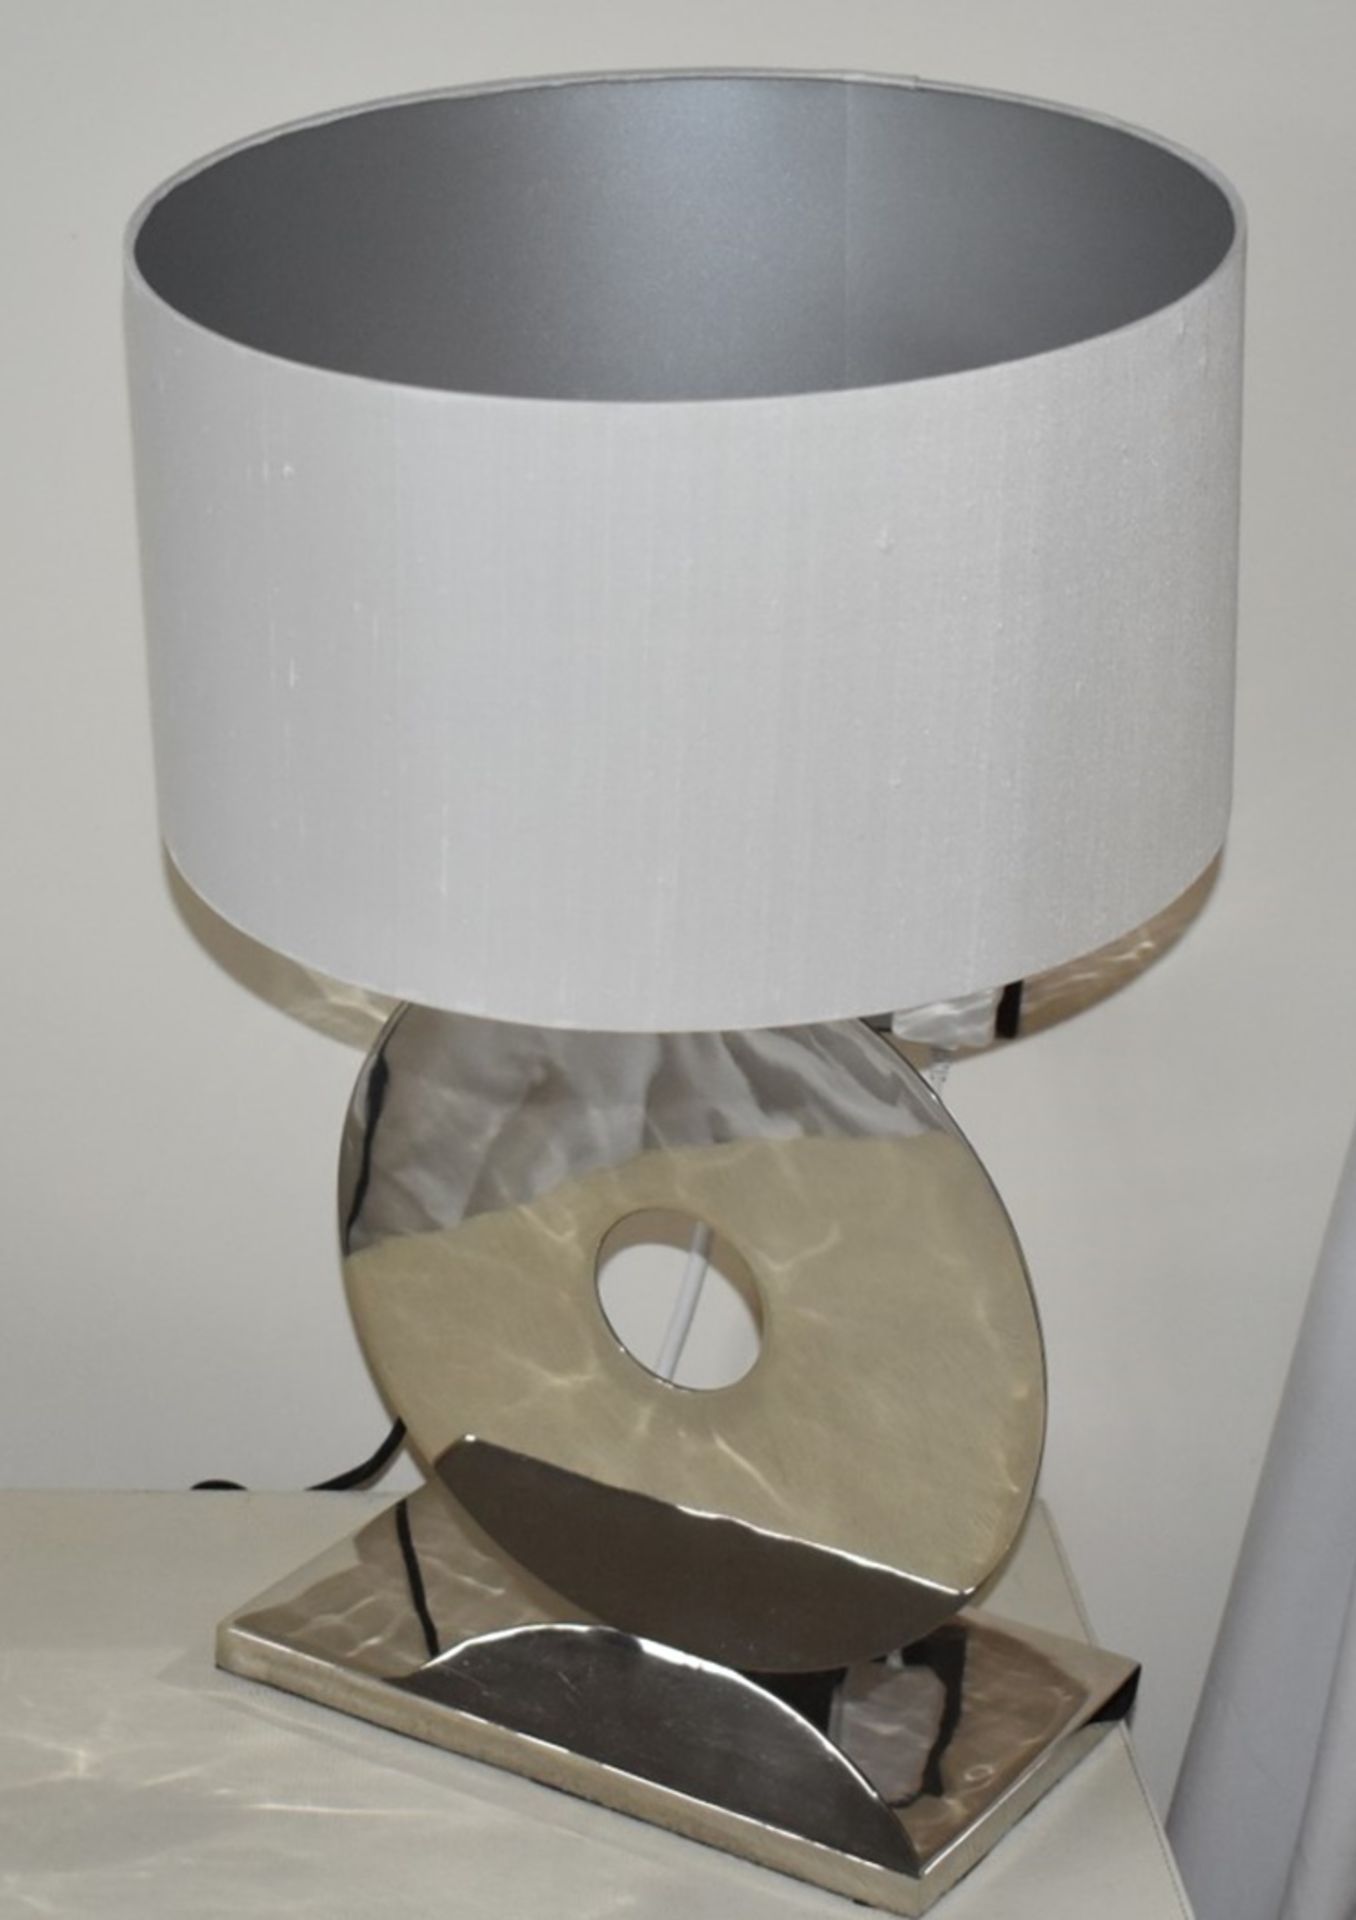 Pair of Table Lamps With Thin Chrome Base and White Shades - Height 55 cms - CL546 - Location: Hale,